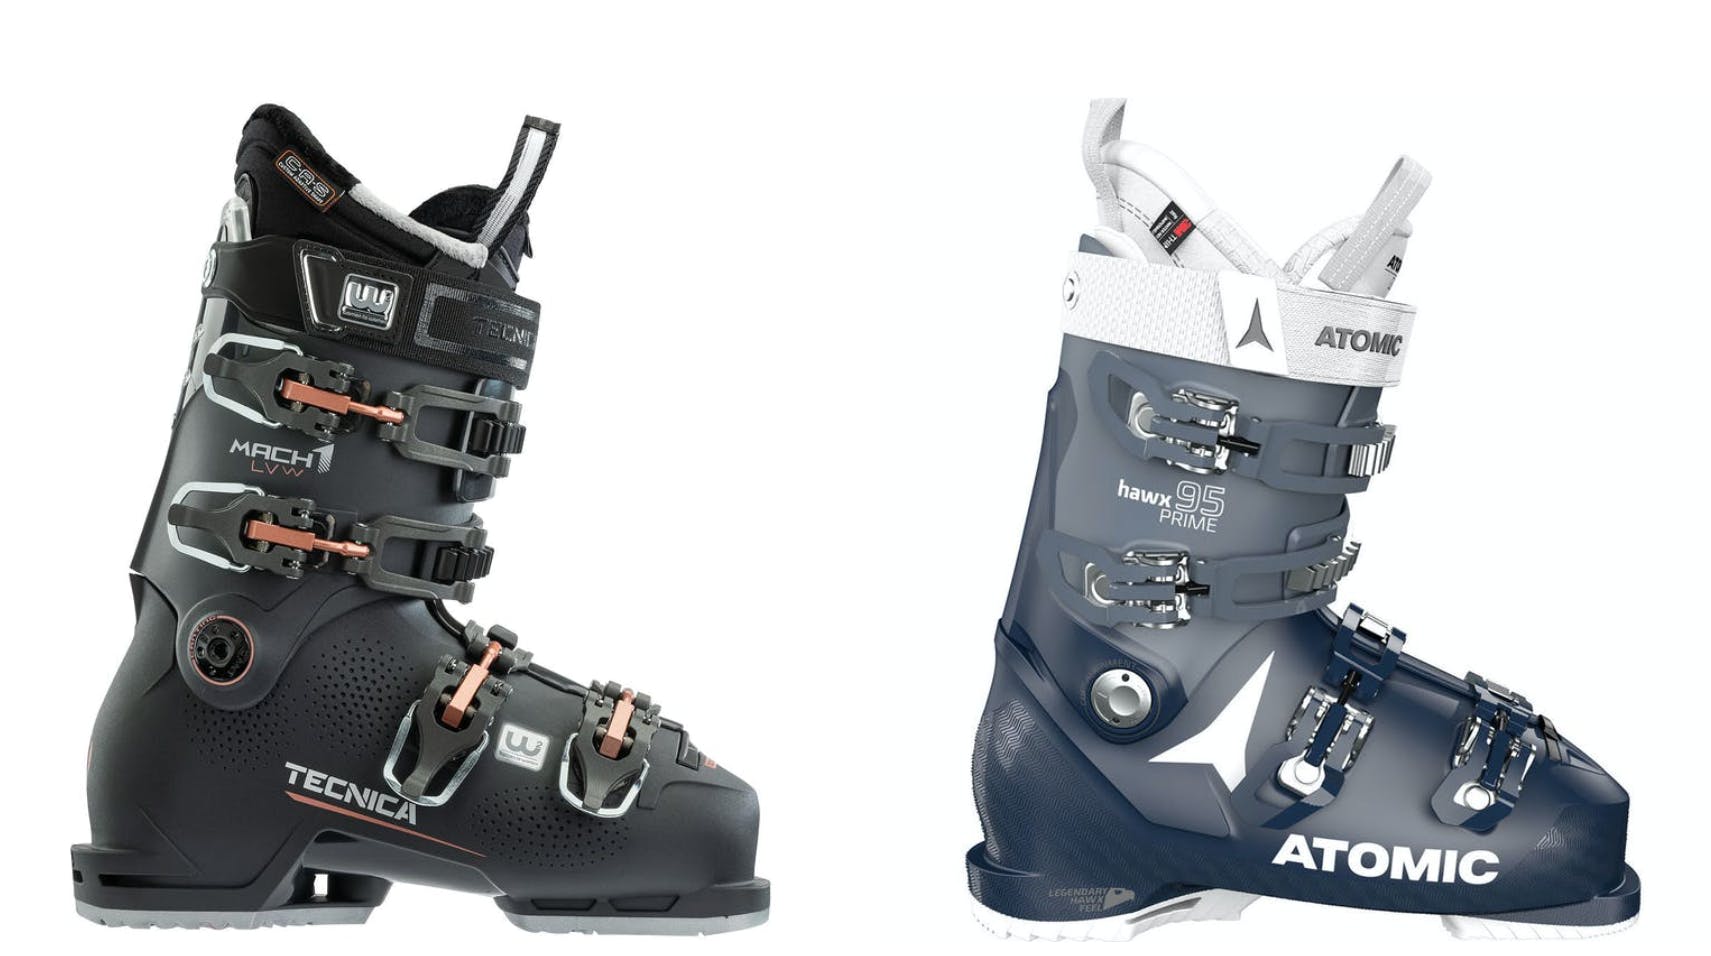 The Technica Mach ski boot and the Atomic Prime boot.